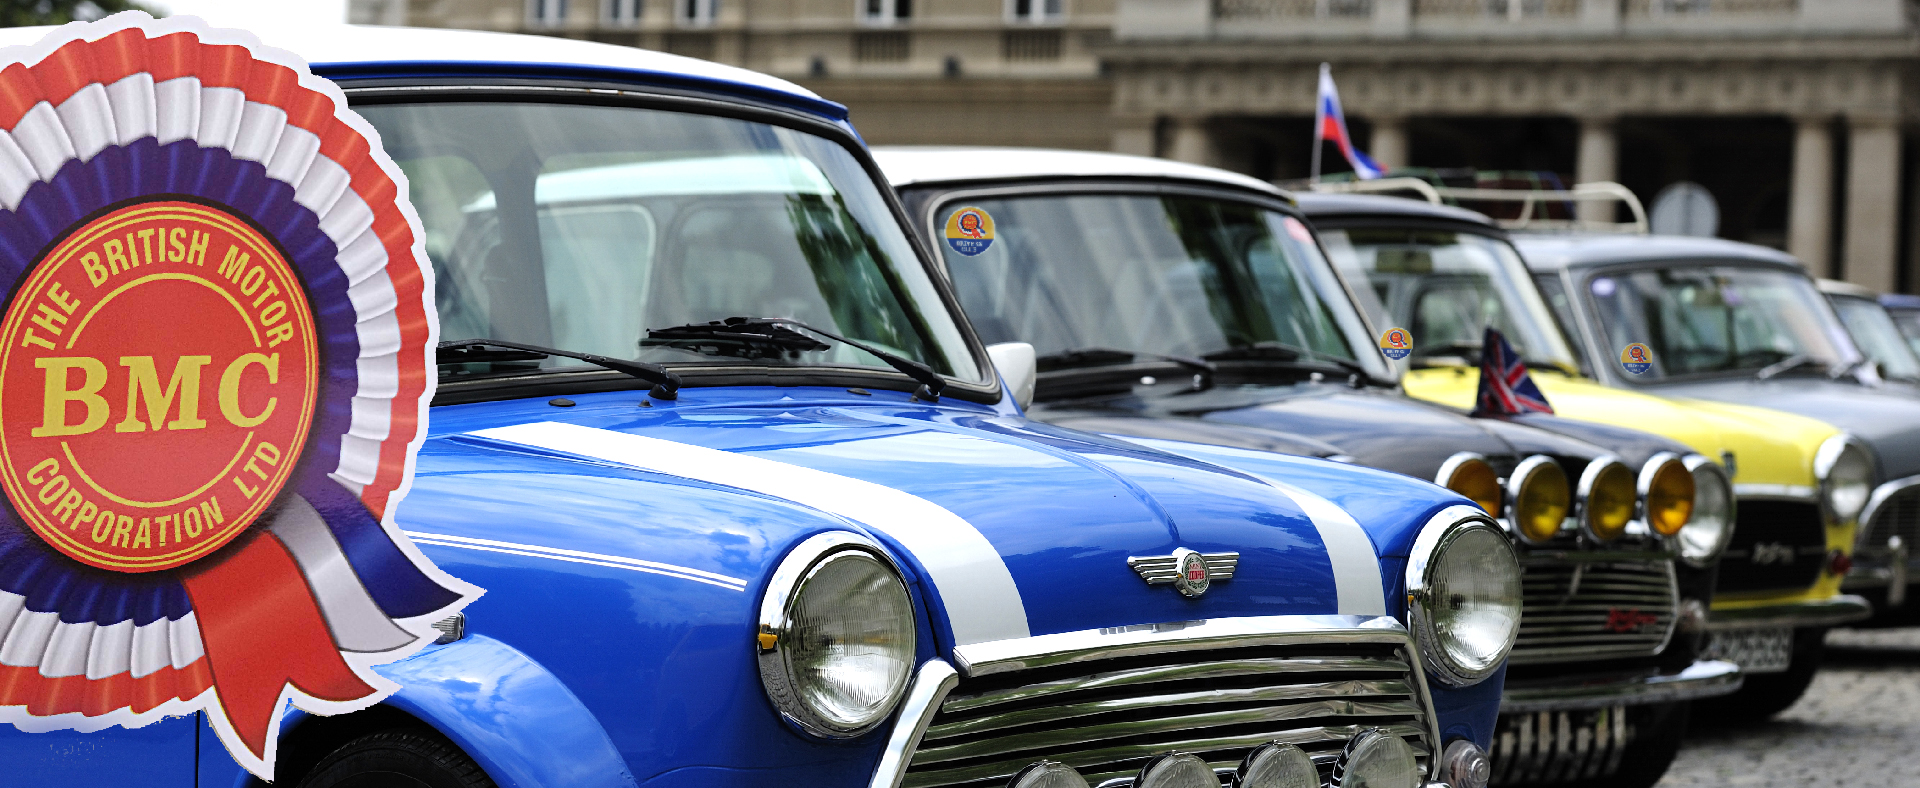 A row of classic mini cars lined up displaying the BMC stickers available on this website